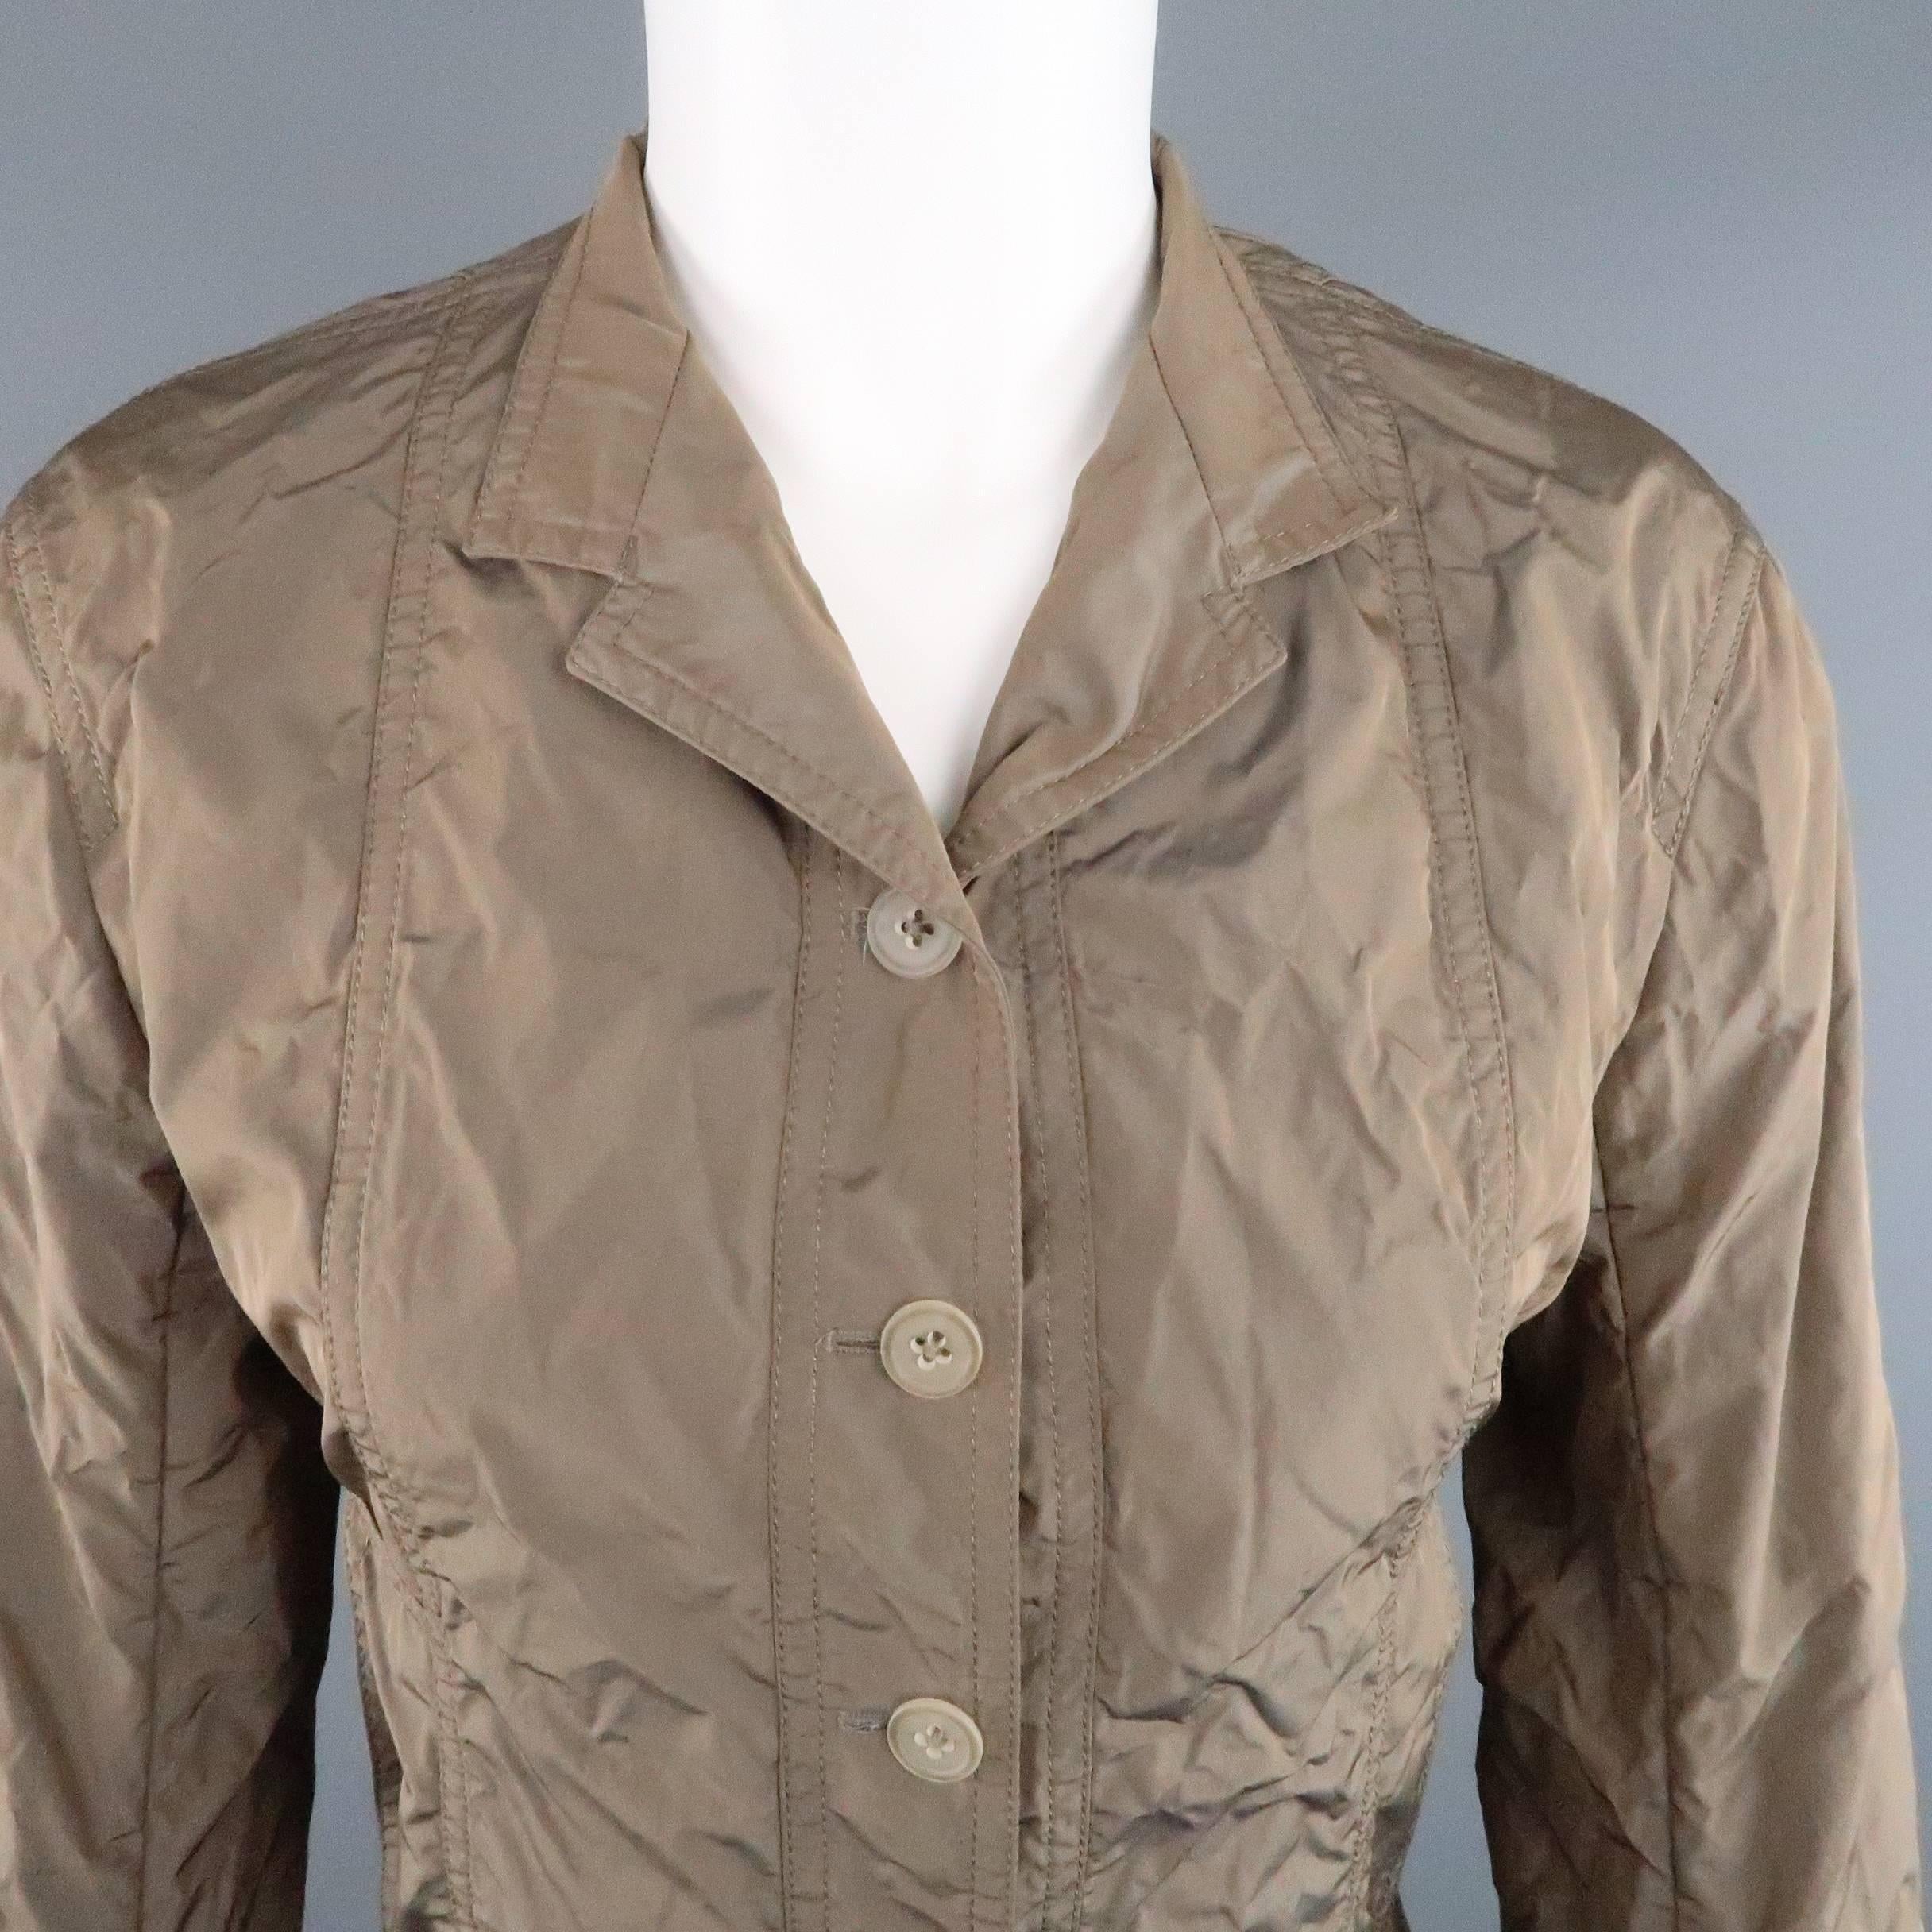 JIL SANDER sport coat comes in a light weight iridescent taupe taffeta and features a five button closure, slit pockets, and high collar. Made in Italy.
 
Excellent Pre-Owned Condition.
Marked: (no tag)
 
Measurements:
 
Shoulder: 16 in.
Bust: 36